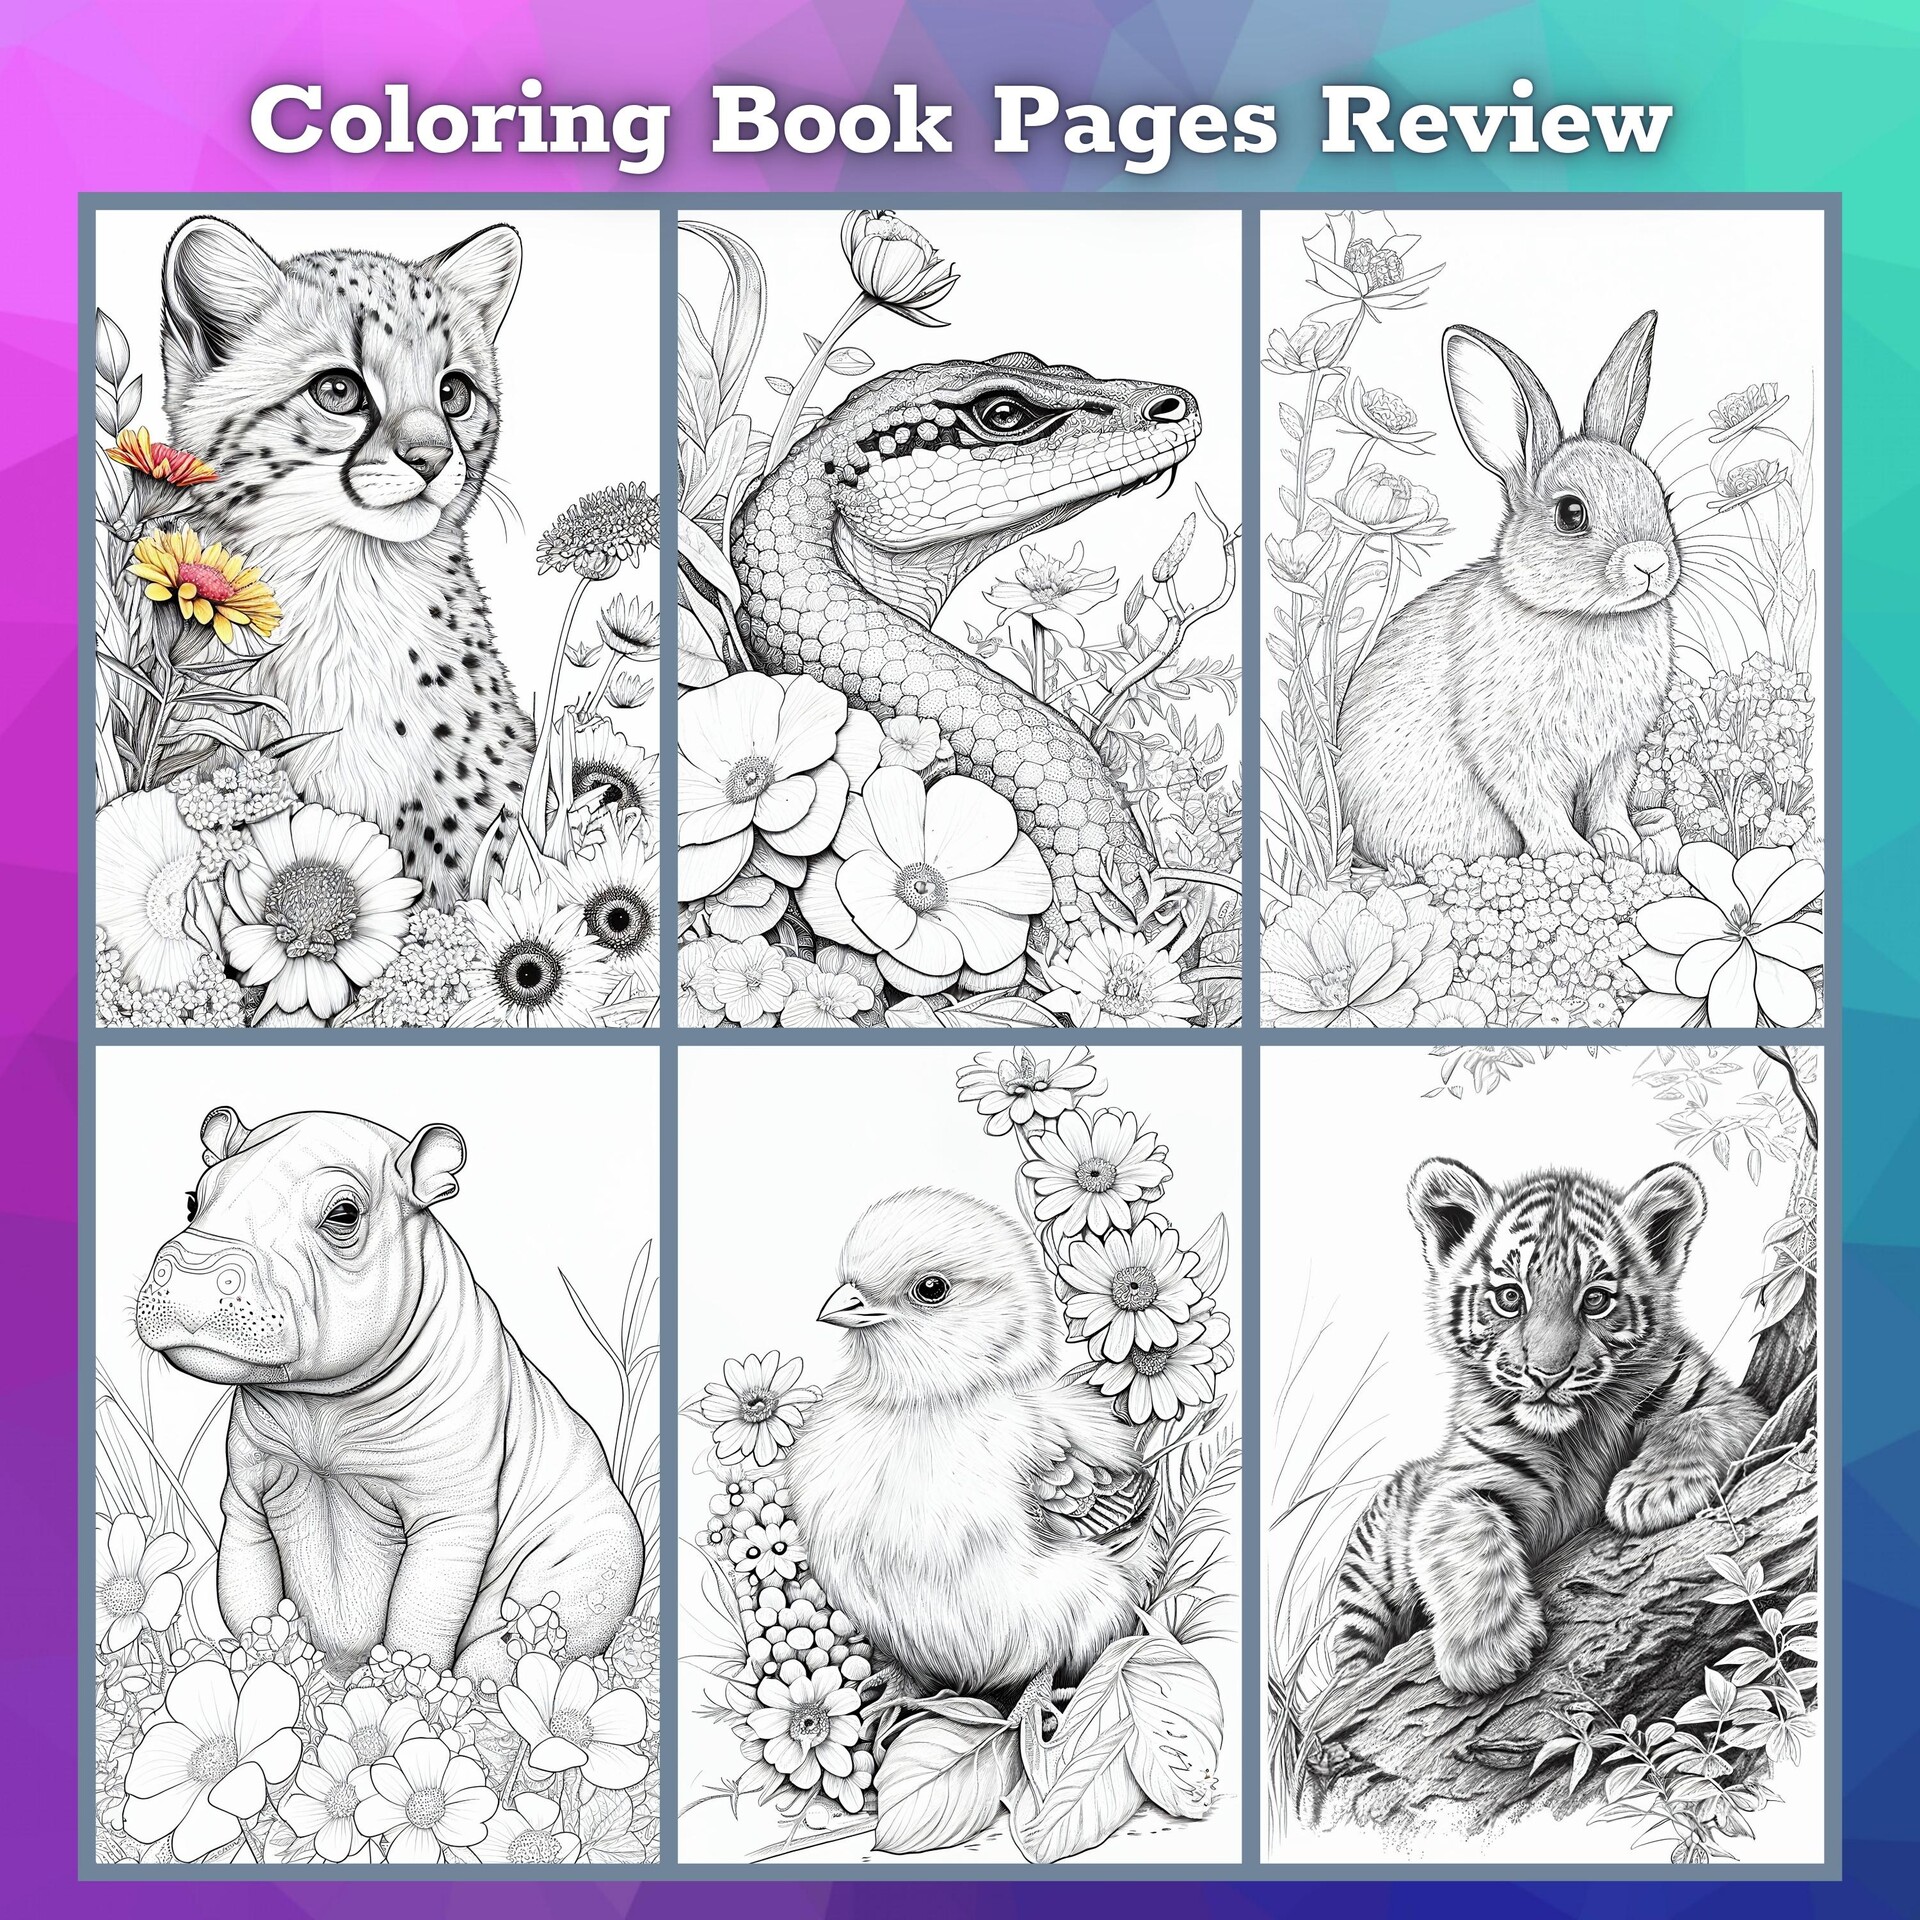 Cute Animal Coloring Book for Adults: Coloring Book, Relax Design for  Artists with fun and easy design for Children kids Preschool (Early  Education #3) (Paperback)